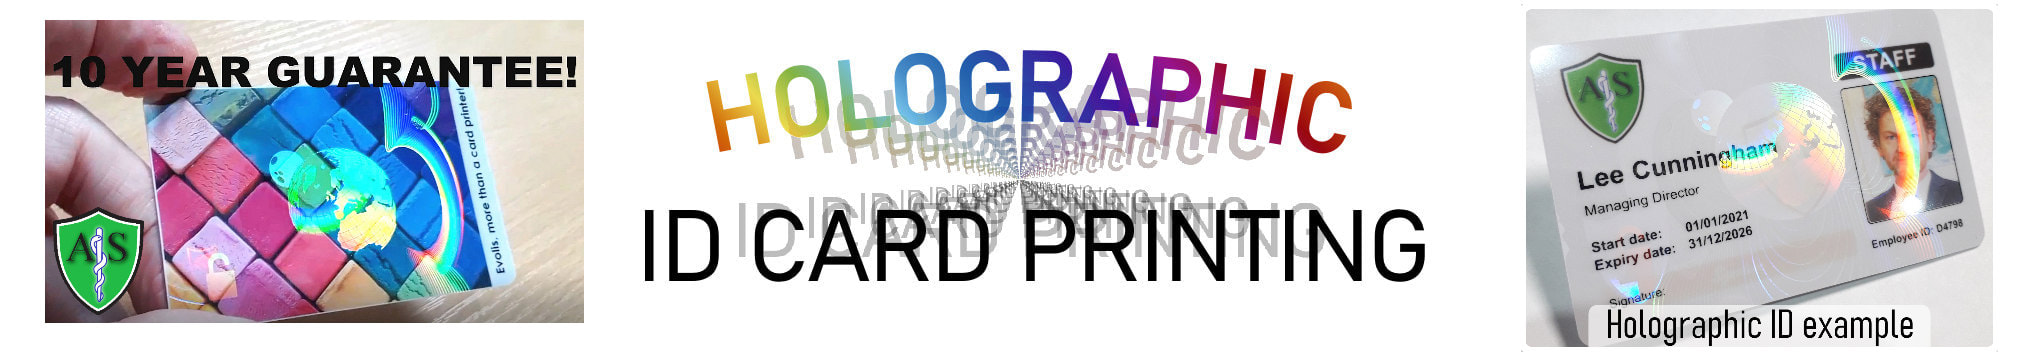 Reading holographic ID card print service. Employee Identity cards with hologram or holograph security mark.